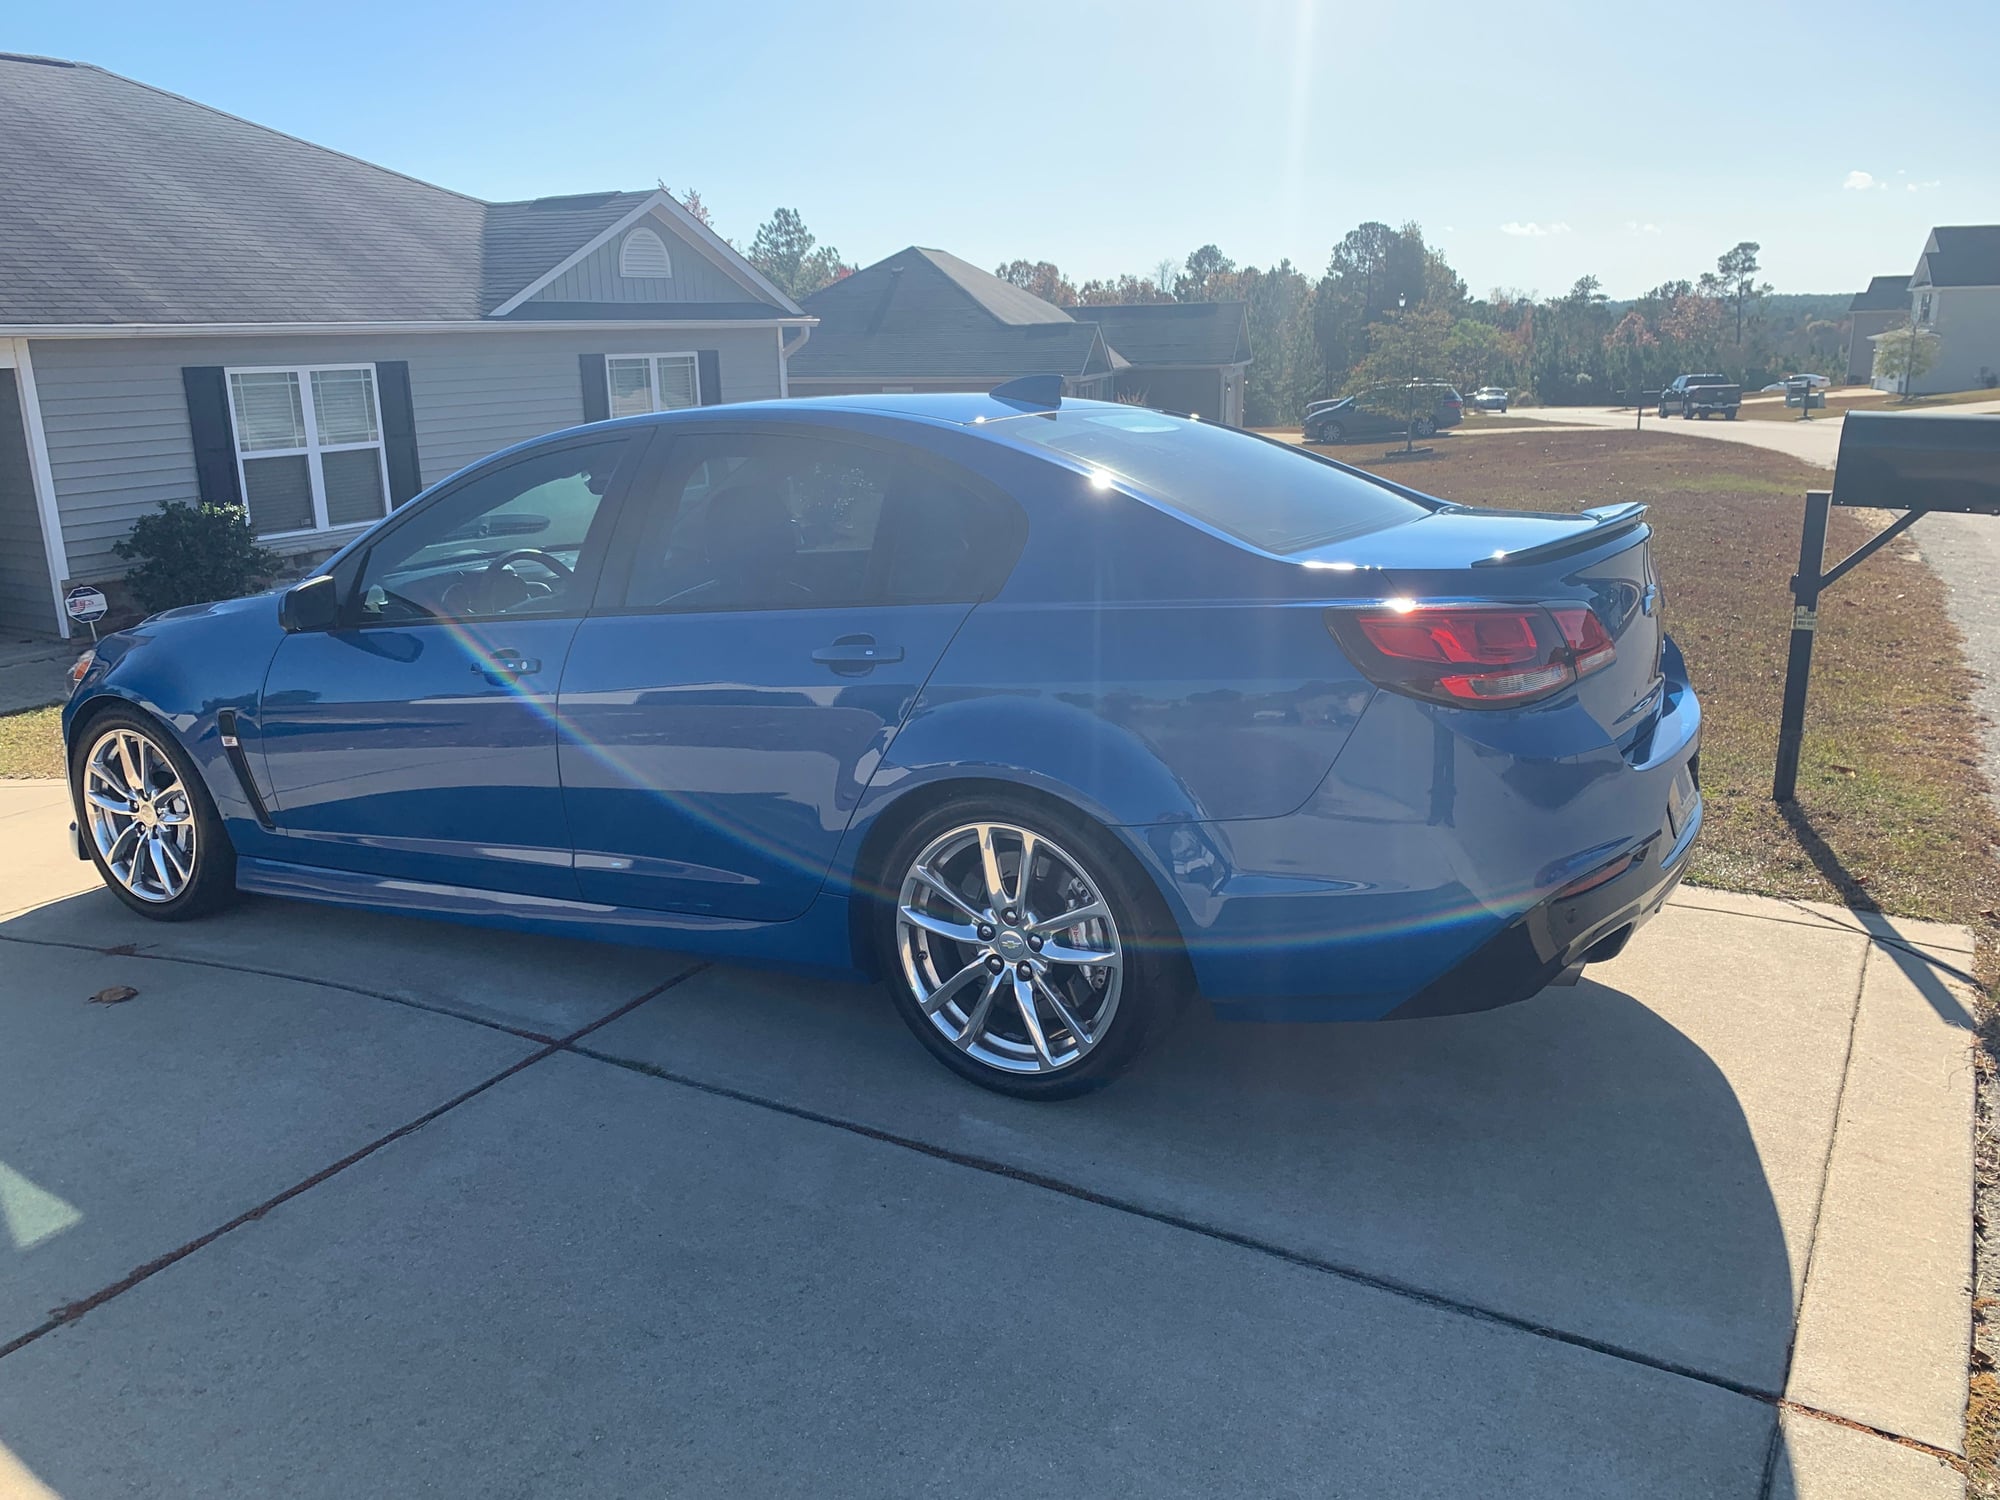 2015 Chevrolet SS - 2015 Chevy SS 6AT Perfect Blue Metallic - Used - VIN 6G3F15RW2FL105290 - 50,601 Miles - 8 cyl - 2WD - Automatic - Sedan - Blue - Fayetteville, NC 28314, United States